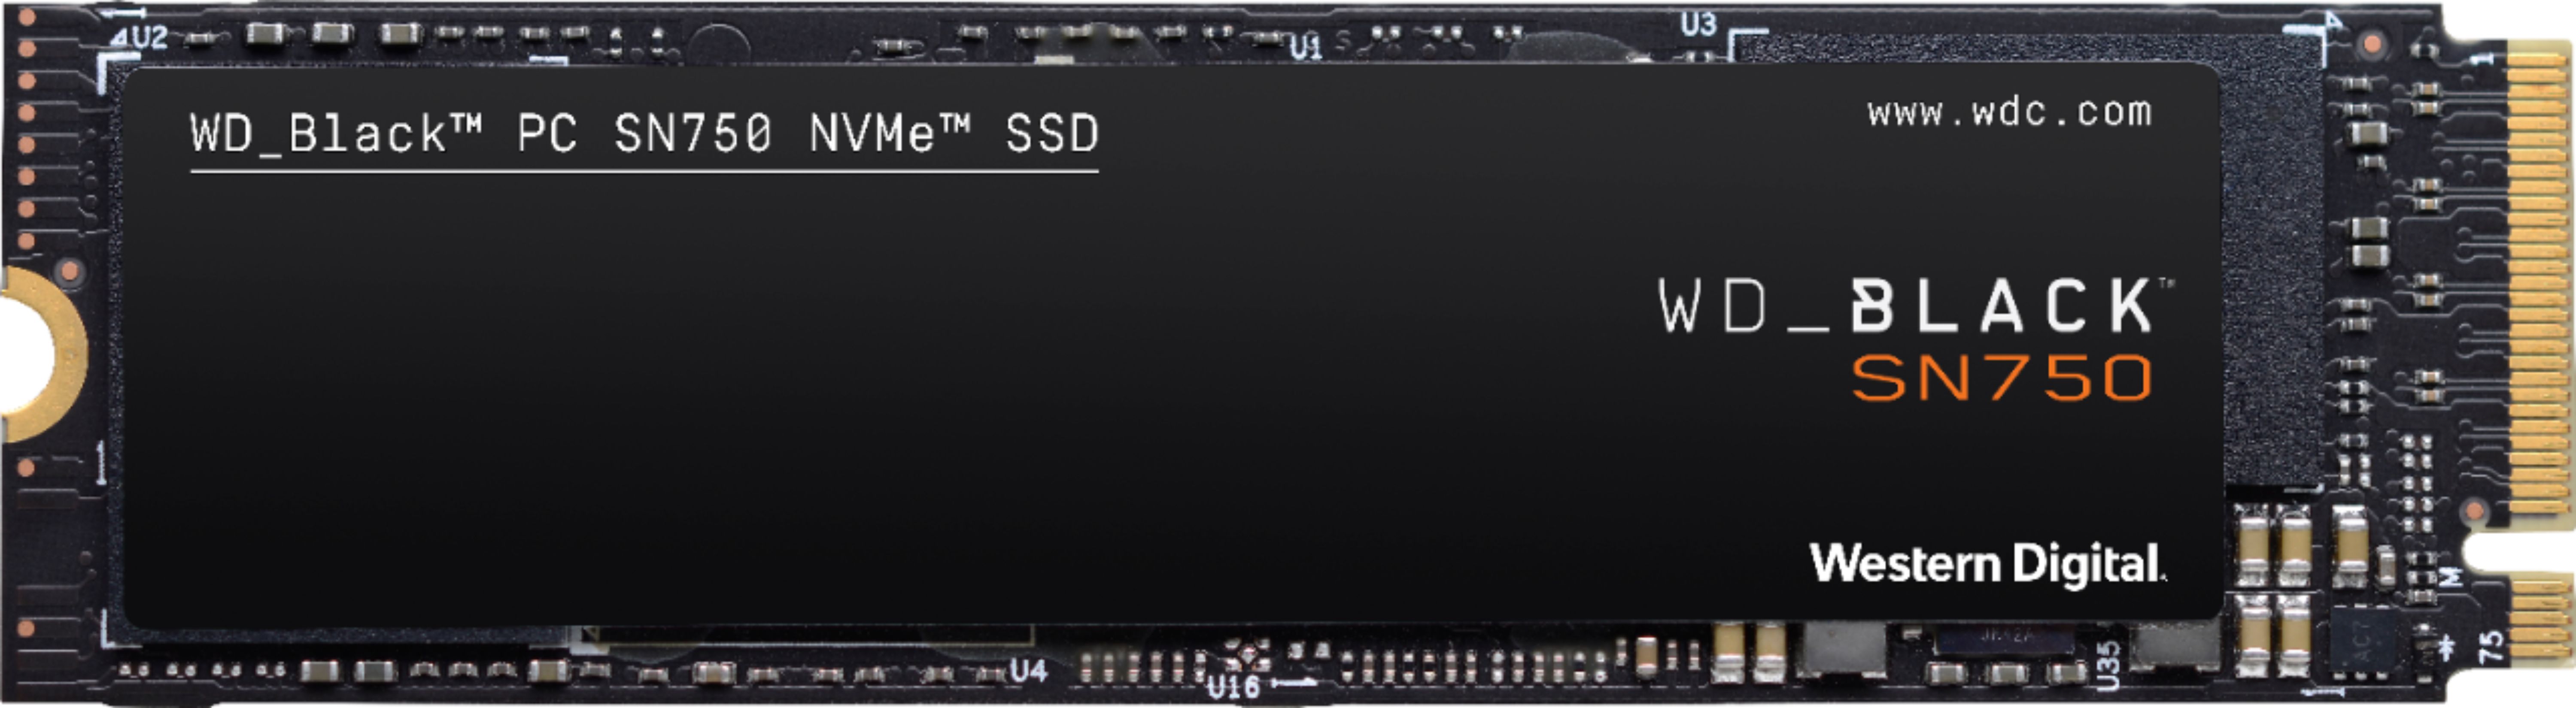 Western Digital WD Black SN750 NVMe 2TB PCIe Gen 3 x4 Solid State Drive (3500 Read 3000 Write)$200 + Free Shipping